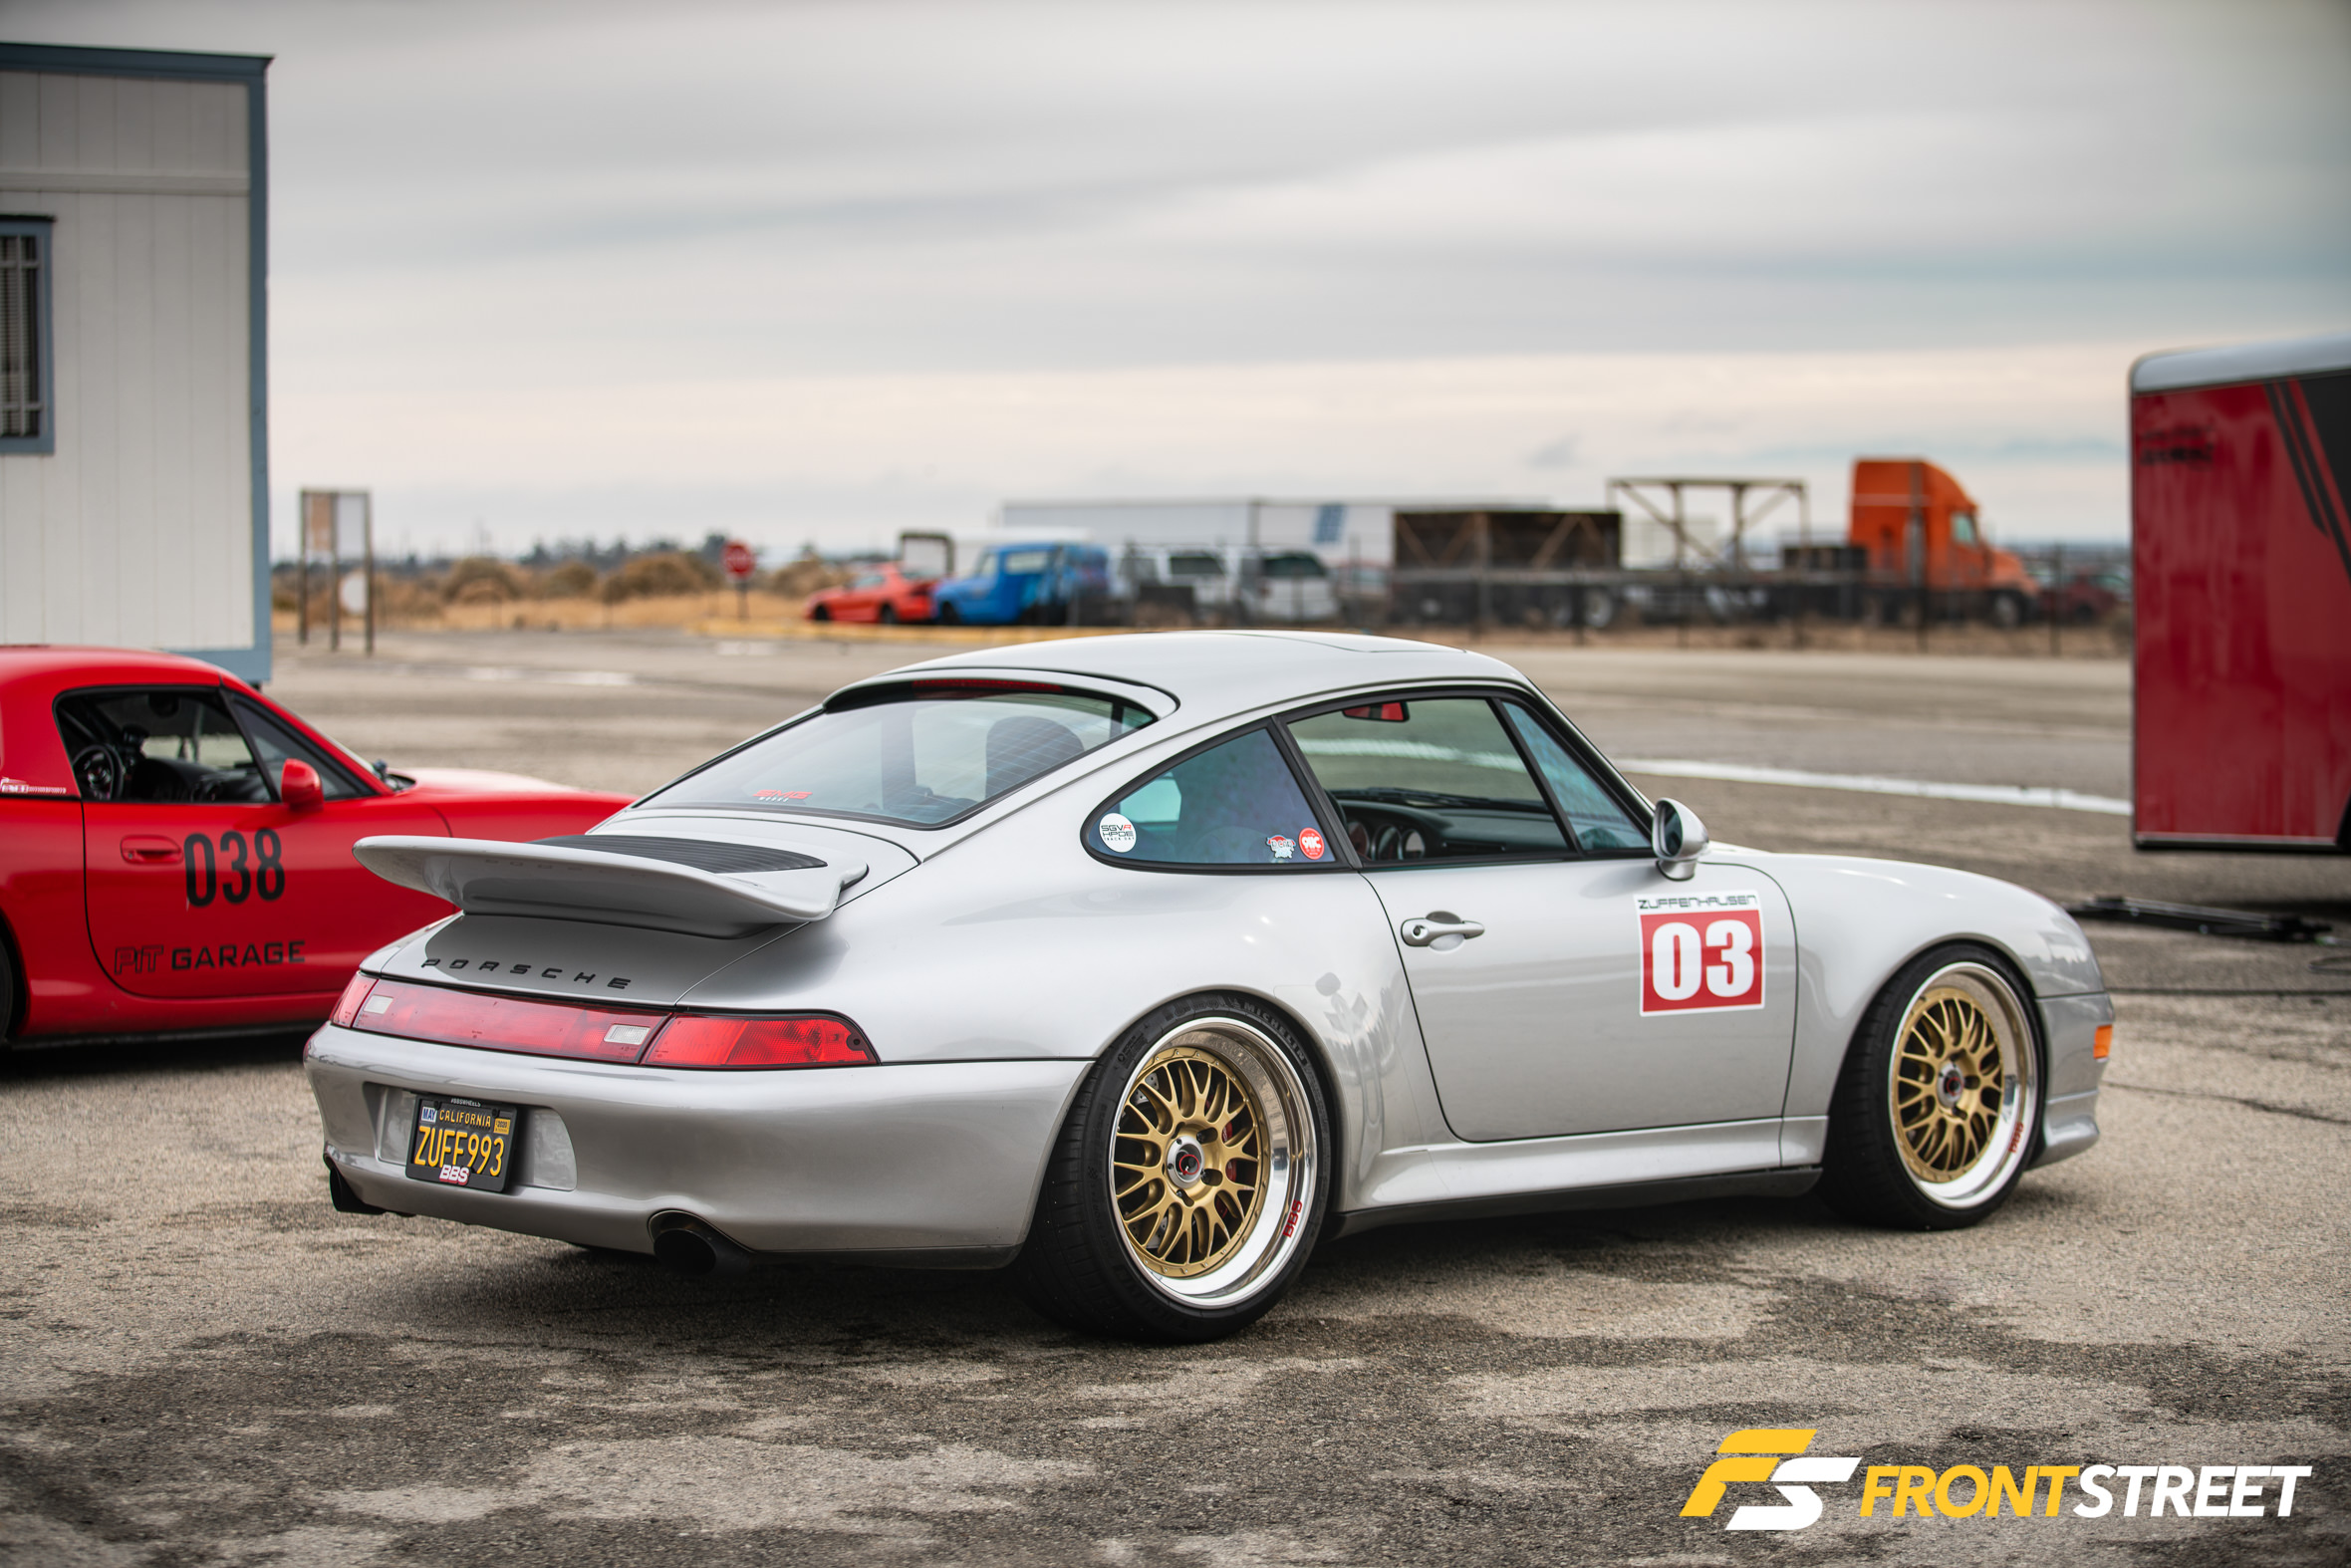 Last Of The Air-Cooled: Mike Truong's Porsche 911 Carrera 4S